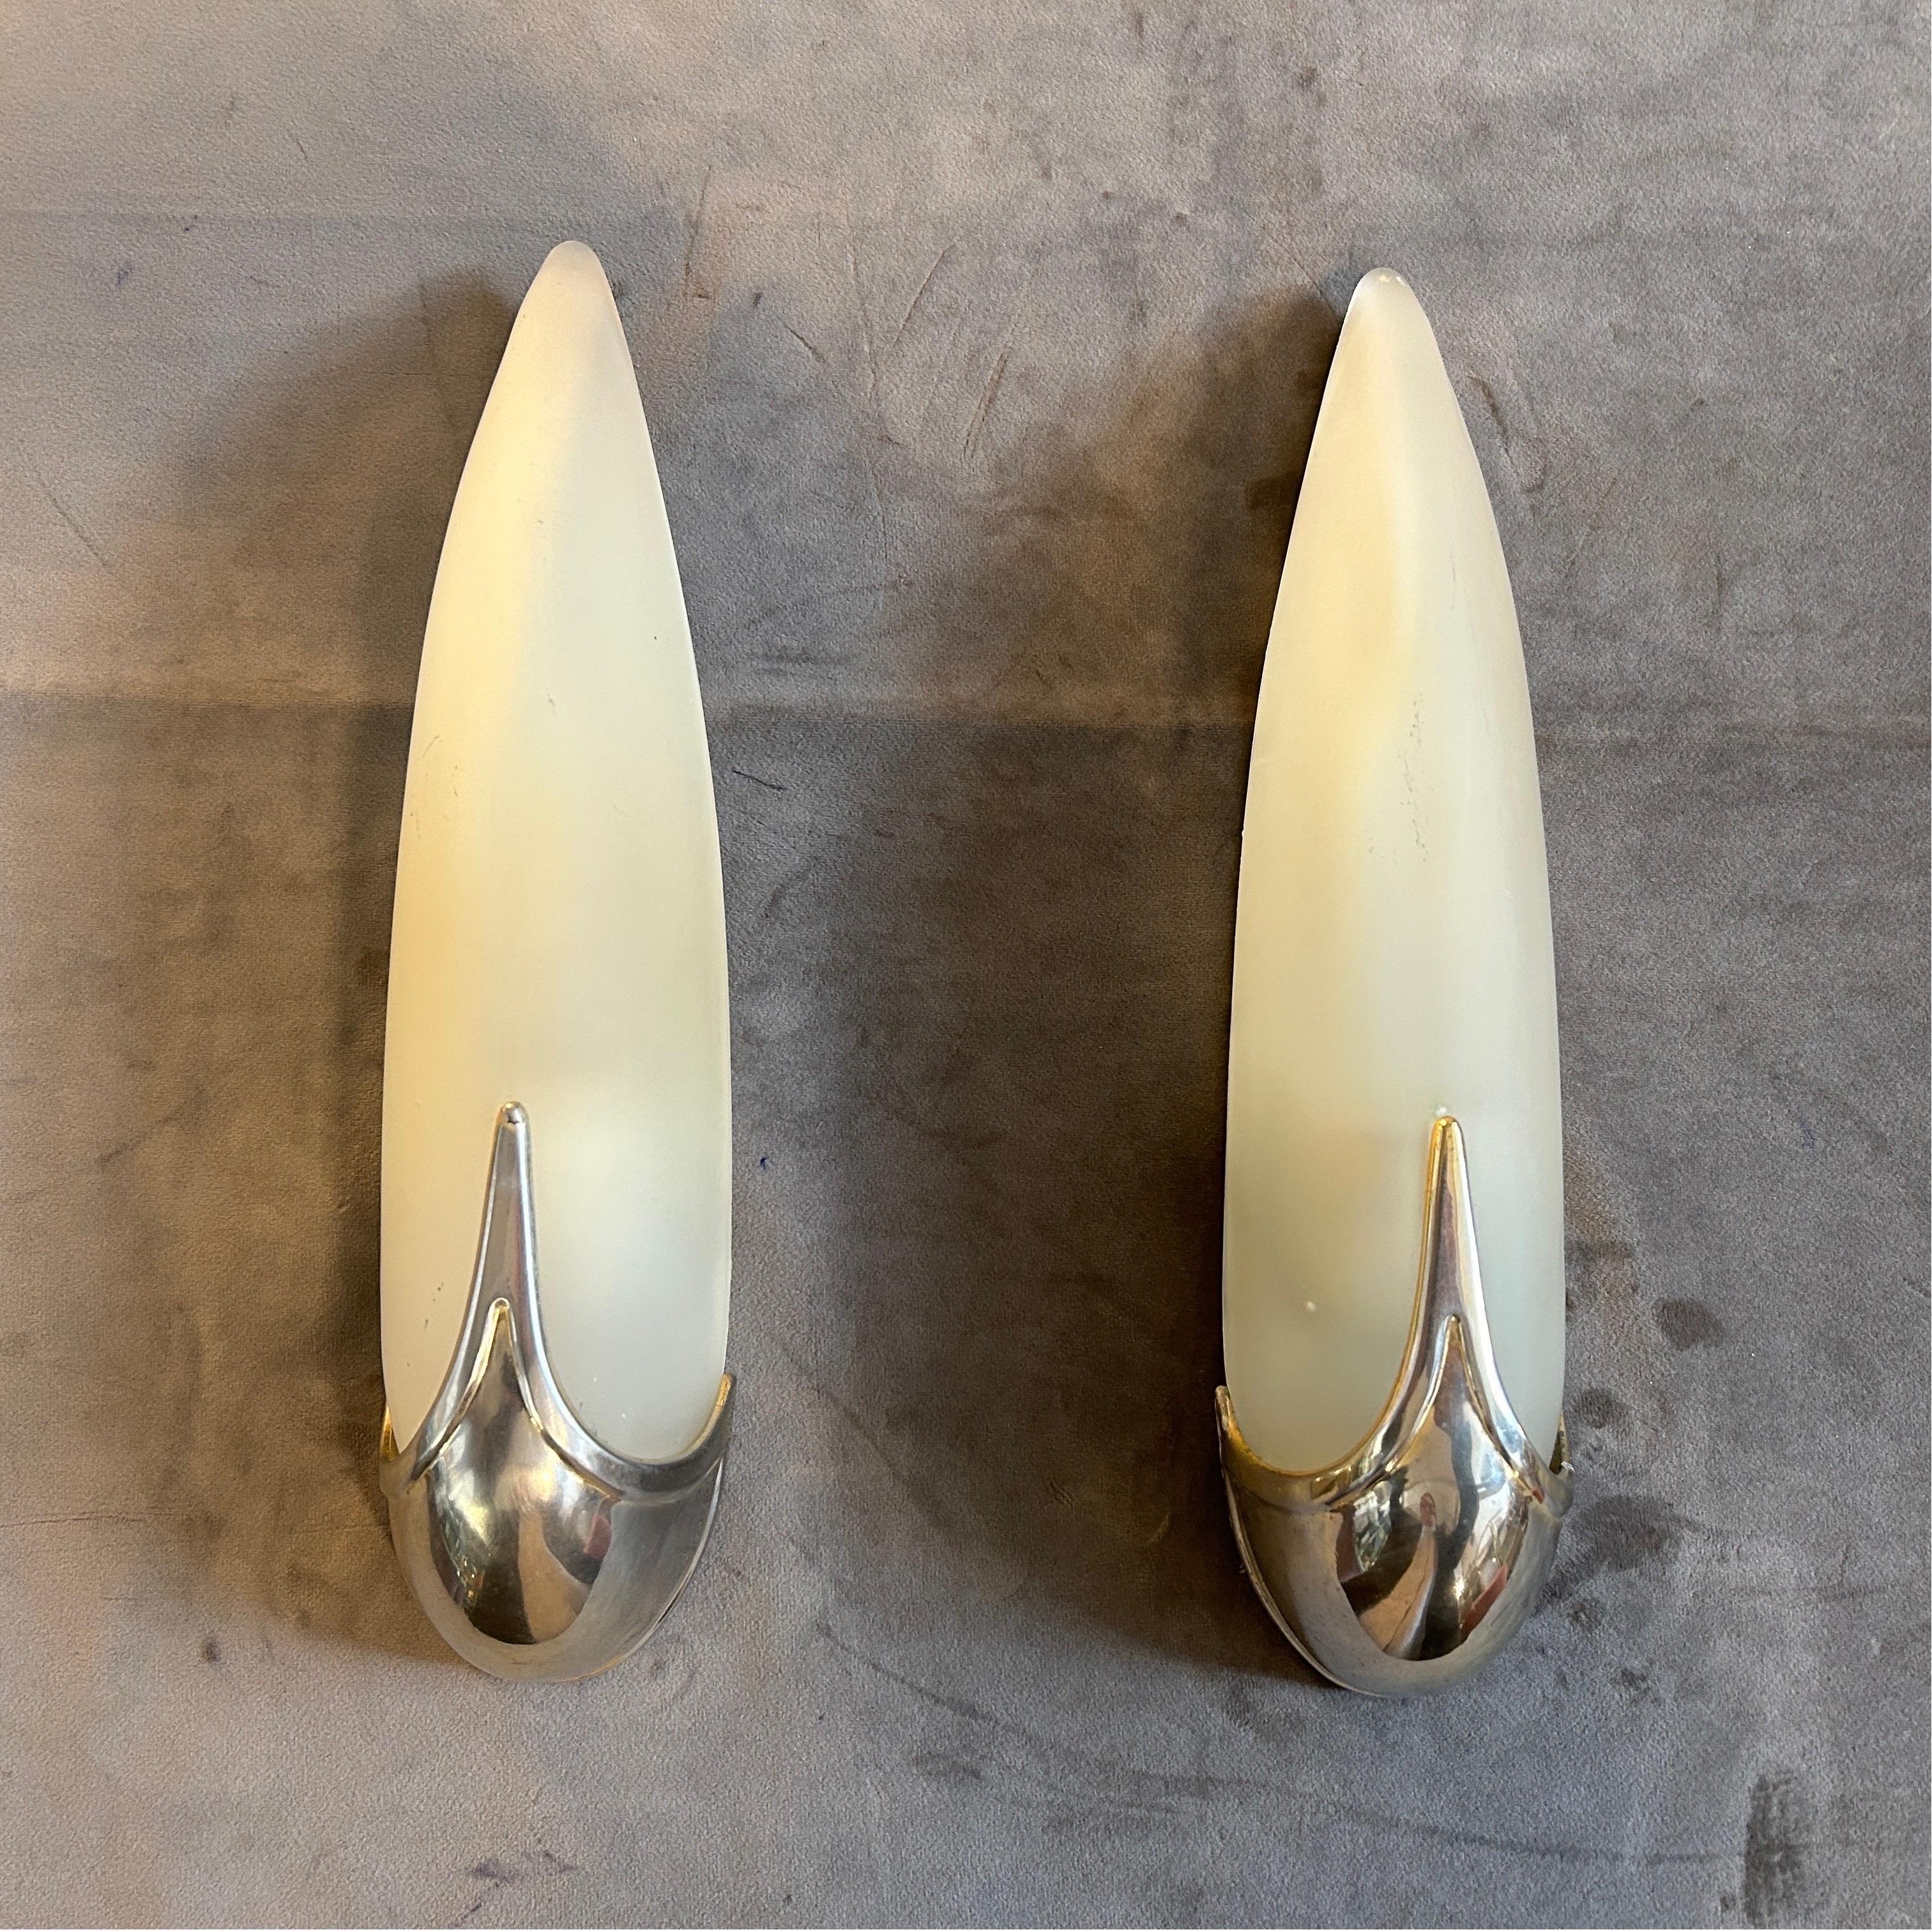 The Set of Two Art Deco Metal and Glass Italian Wall Sconces is a vintage lighting fixture that combines both metal and glass materials in an Art Deco style. The sconces were likely manufactured in Italy during the 1940s, and were designed to be